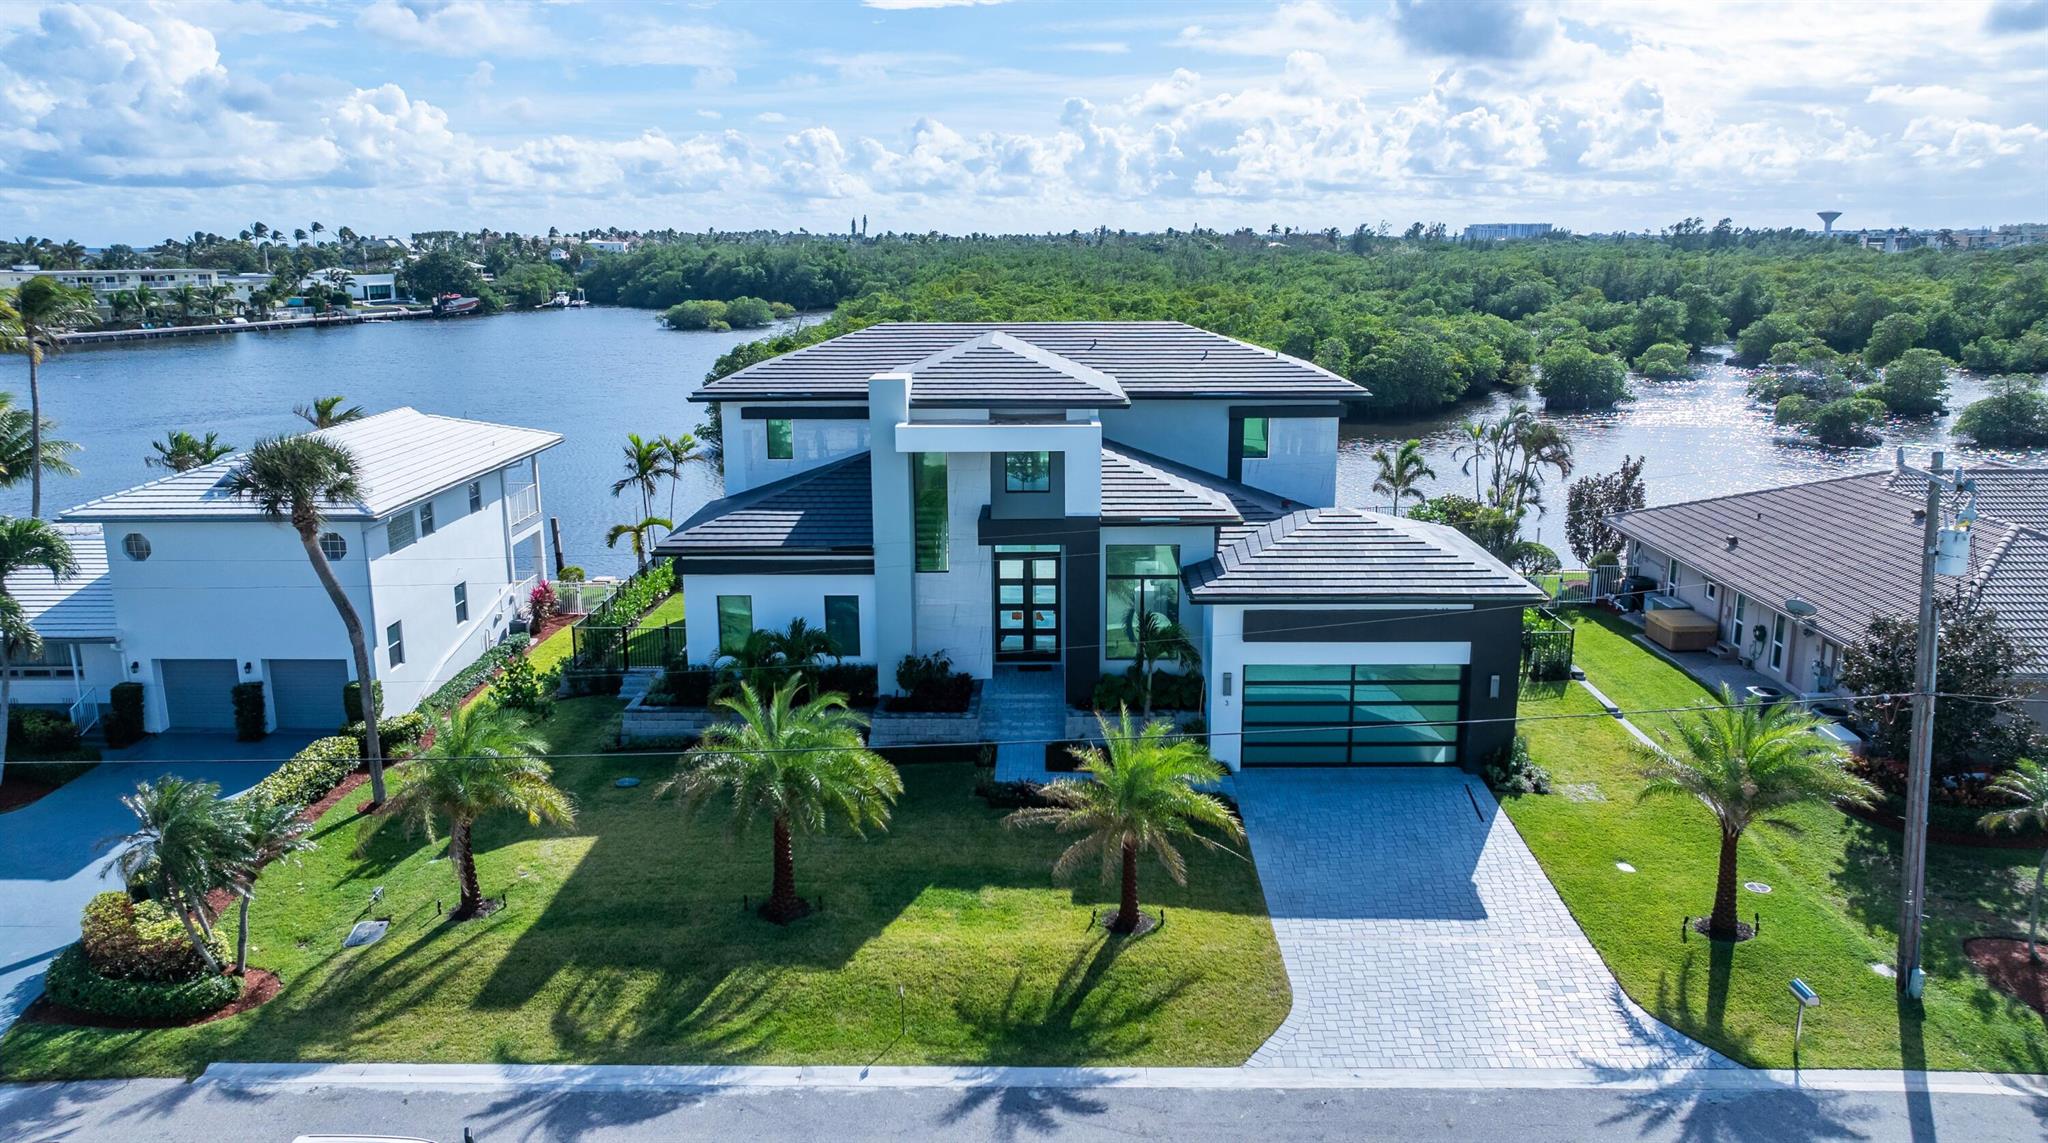 Brand new construction modern estate, on an Intracoastal Waterway island, overlooks a veritable forest of mangroves on a protected pristine nature area owned by the Town of Ocean Ridge. With 100-feet on the water and a dock, boaters will enjoy unimpeded access to the ocean. Details include a great room with a bar, great chef's kitchen, first-floor primary suite and a second-floor VIP suite. RESIDENCE:

Designed by Boca Raton architect Richard Bremer and just completed this year, with four bedrooms plus an office and 5,407 +/- total square feet, this stunning Modern estate, clad in stucco and highlighted by stone, offers the ultimate for indoor/outdoor waterfront living. Its well-conceived open-layout, split-bedroom plan  accommodates views of the water, nature area and a verdant stand of mangroves from every room. Immediately from the entry, one is transfixed. Elegant, chic, and exceedingly relaxing, details include high ceilings, window-walls of glass bathing the interiors in soft sunlight, large-format Italian porcelain flooring downstairs and engineered hardwood flooring upstairs. The two-story foyer and staircase introduce the great room, featuring a wet bar perfect for entertaining, and banks of glass sliding doors open to the poolside lanai blurring the boundary between inside and out. Just adjacent is the double-island chef's kitchen, which is fitted with handsome Shaker-style cabinetry accommodating copious storage, an artistic tile backsplash set in a herringbone pattern, and professional-grade Thermador stainless-steel appliances. The serene first-floor primary suite, set apart for privacy, comprises a spacious bedroom with sliding doors opening to the pool patio and offering water views, double custom-fitted walk-in closets and a spa-inspired bathroom with duo vanities, oversized walk-in glass-enclosed shower and a free-standing Jacuzzi tub. Upstairs, The VIP suite and two guest bedroom suites all open to the water-view balcony, with one of the guest bedrooms currently serving as an inviting club room. Completing the layout are an office, powder room, cabana bath, laundry room and two-car garage with space for car lifts.

PROPERTY:

Homeowners of this amazing estate enjoy incredible and unique views. On an Intracoastal Waterway island, the estate's south-facing fenced back yard overlooks the canal to a veritable forest of mangroves on a protected pristine nature area owned by the Town of Ocean Ridge. The treasured refuge is home a variety of Florida wildlife, a true wonder for nature lovers. Here, homeowners will also enjoy a fabulous indoor/outdoor lifestyle. The covered lanai, with a summer kitchen and grill, is just adjacent to the sun-splashed pool that integrates a sun shelf and infinity spa, set within an expansive patio. And that is not all. With a dock and 100 feet on a canal that adjoins the Intracoastal, boaters will enjoy easy ocean access with no fixed bridges.

LOCATION:

Inlet Cay Drive, Ocean Ridge, Florida. One of the Gold Coast's best-kept secrets, exclusive Ocean Ridge is prized for its quiet solitude, relaxed ambiance and unspoiled landscape nestled between the Atlantic Ocean and the Intracoastal Waterway.